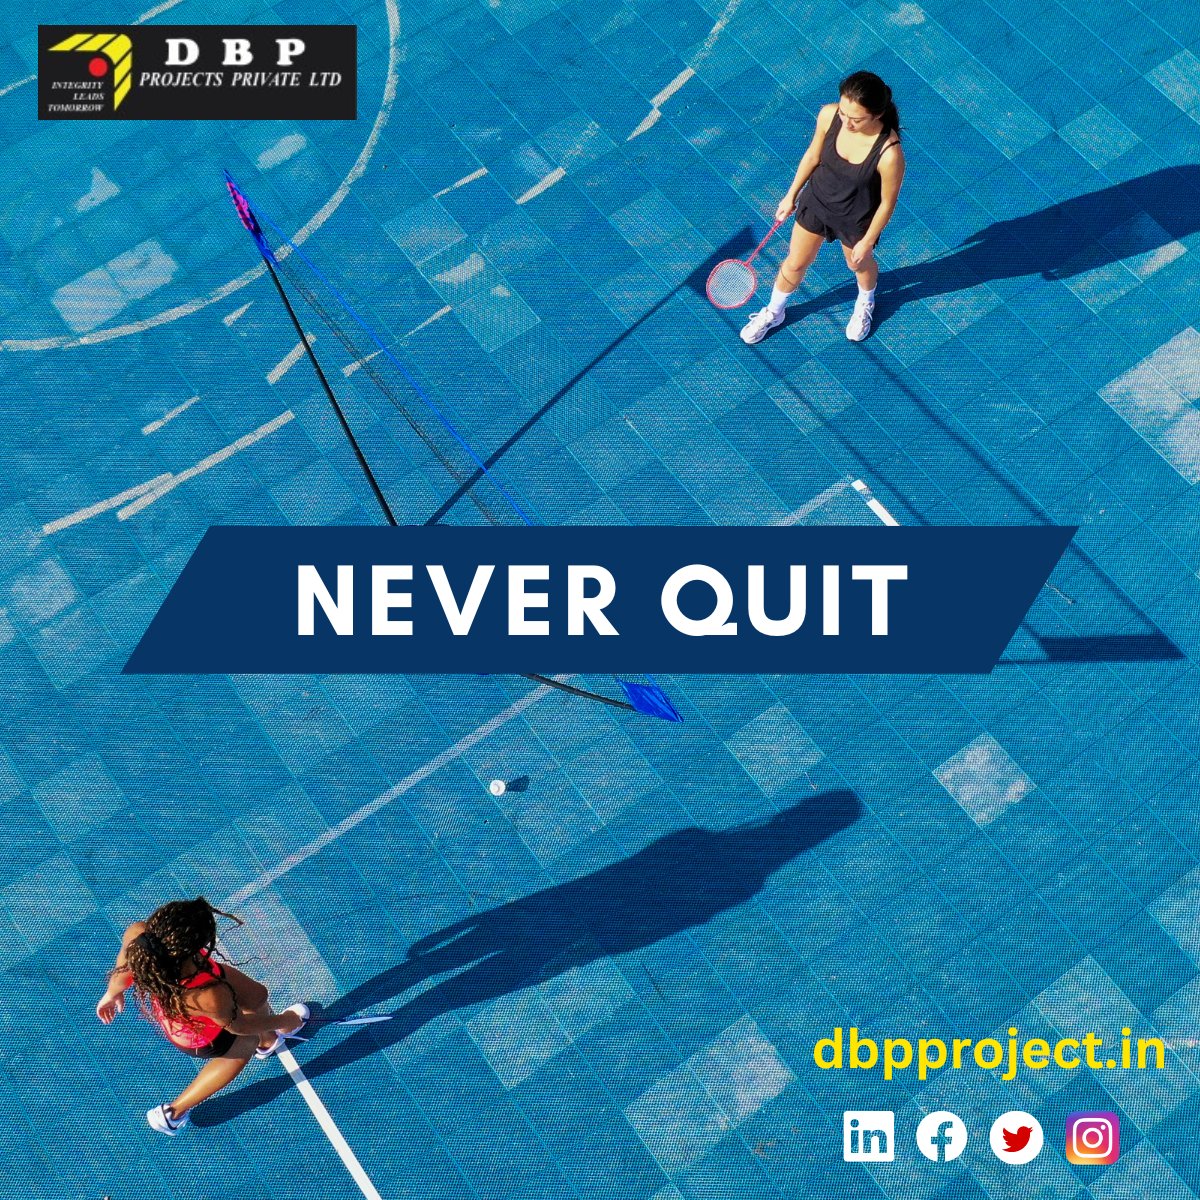 'Never quit'.
#dbp #dbpproject 
#autocad #autodesk #autocaddrawing #gis #gismapping #QGIS #surveying #topography #mapping #DRAWING #arcgis #microstation
#Maptitude #Carlson #Revit #geographicinformationsystems #geometry #geoengineering #raster #vector #GEOreference #utm #pixel